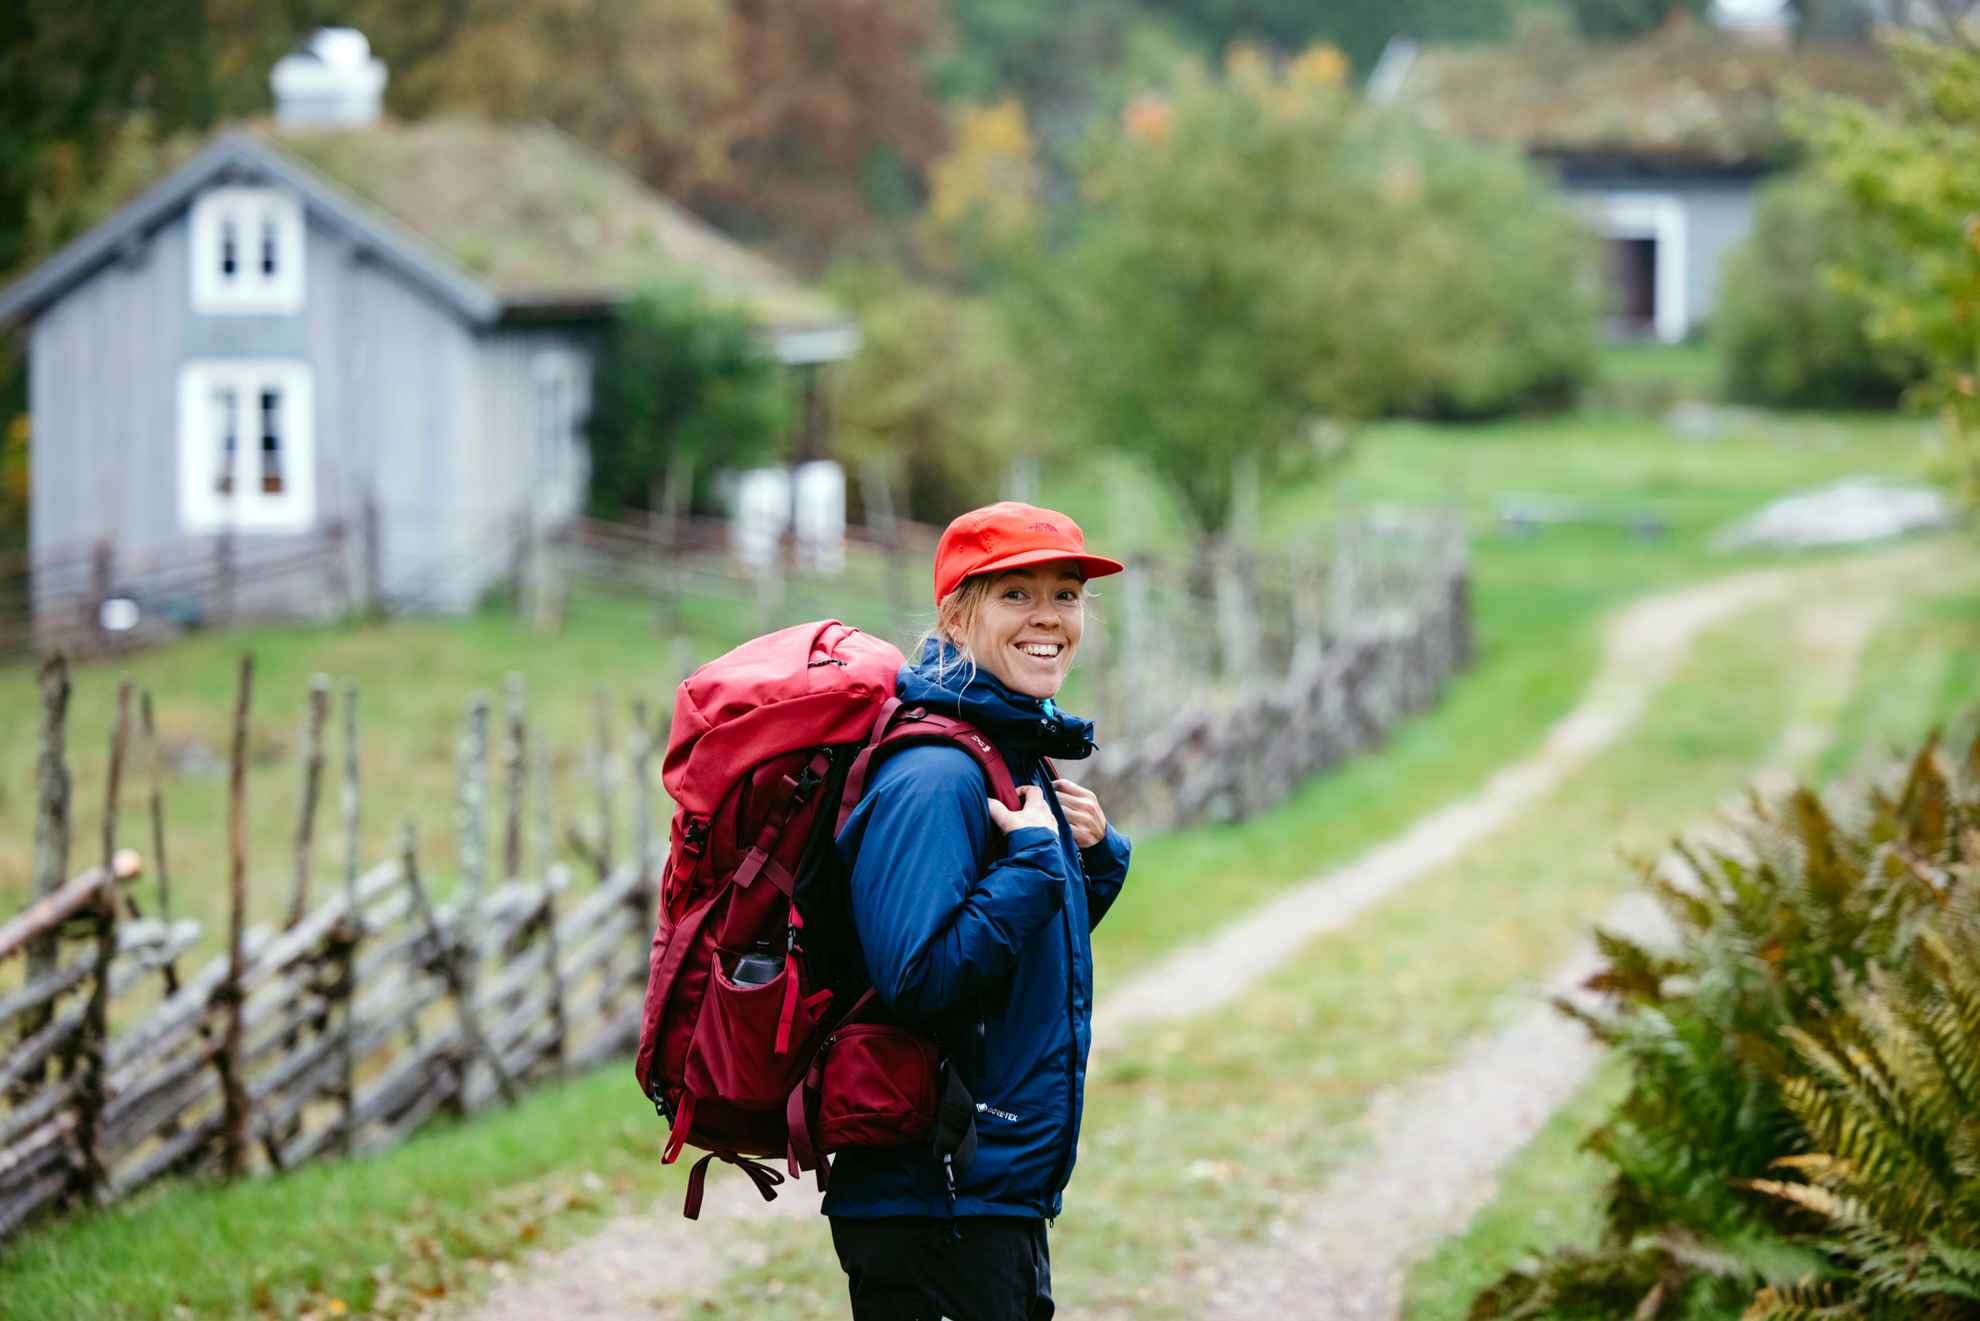 A woman in outdoor clothing and a backpack looks at the camera while standing on a hiking trail. A wooden croft is seen in the background.